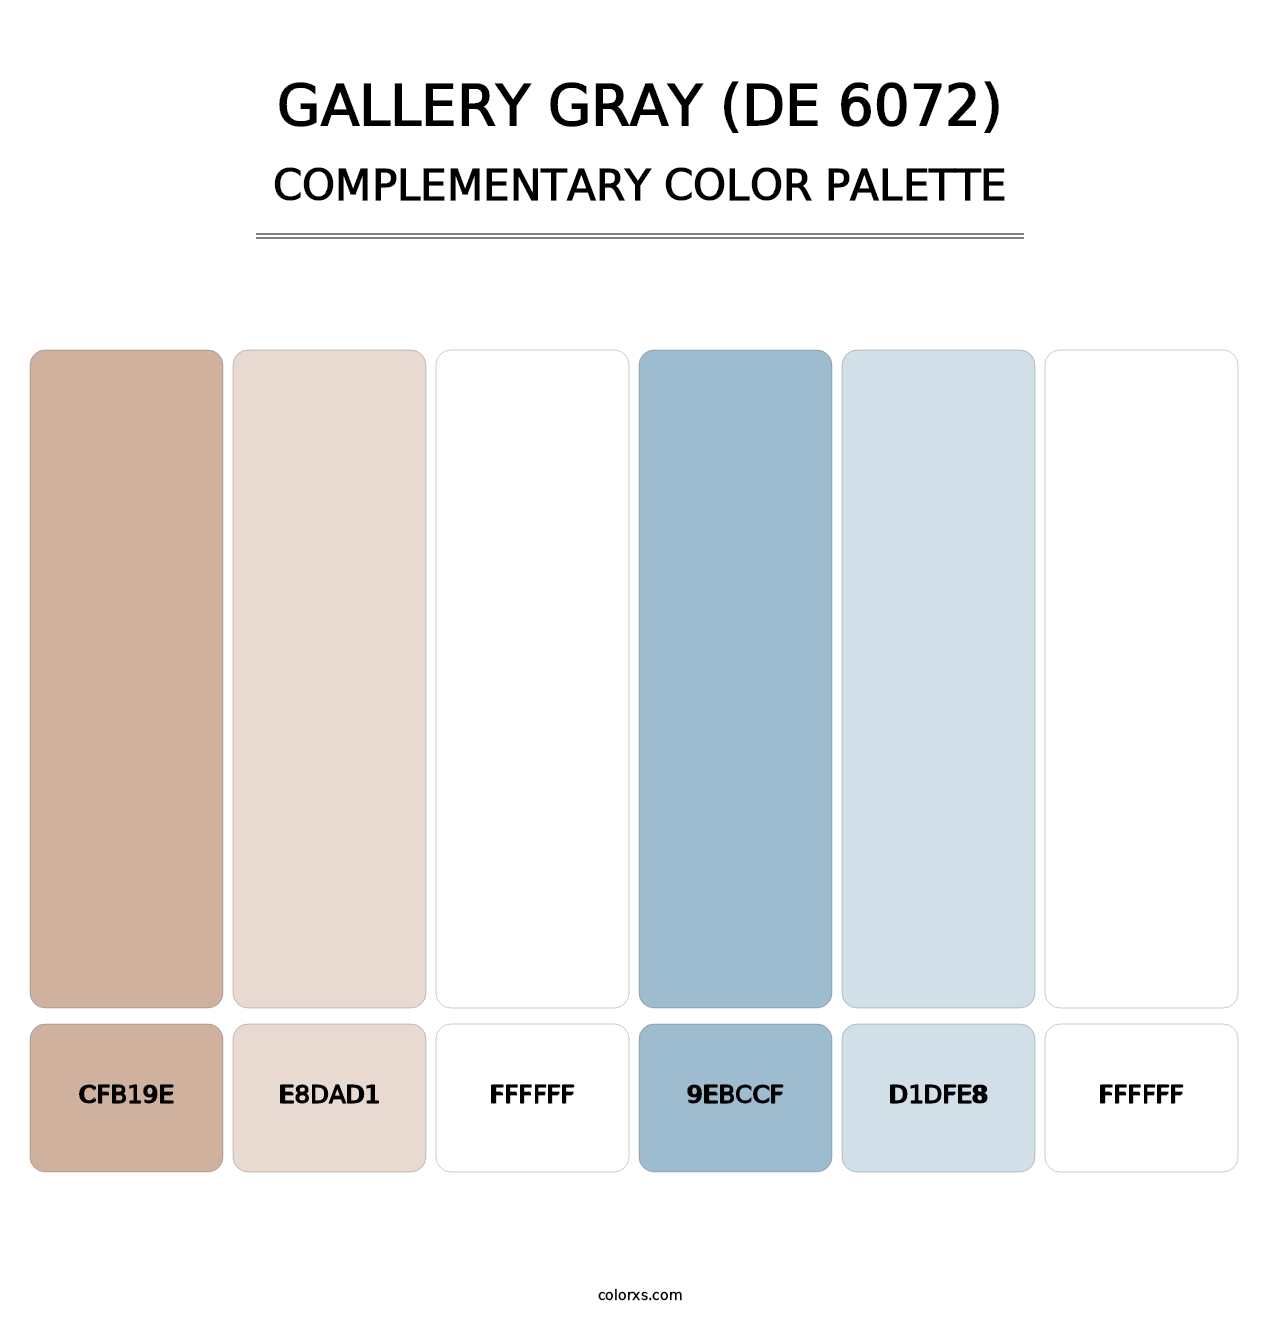 Gallery Gray (DE 6072) - Complementary Color Palette